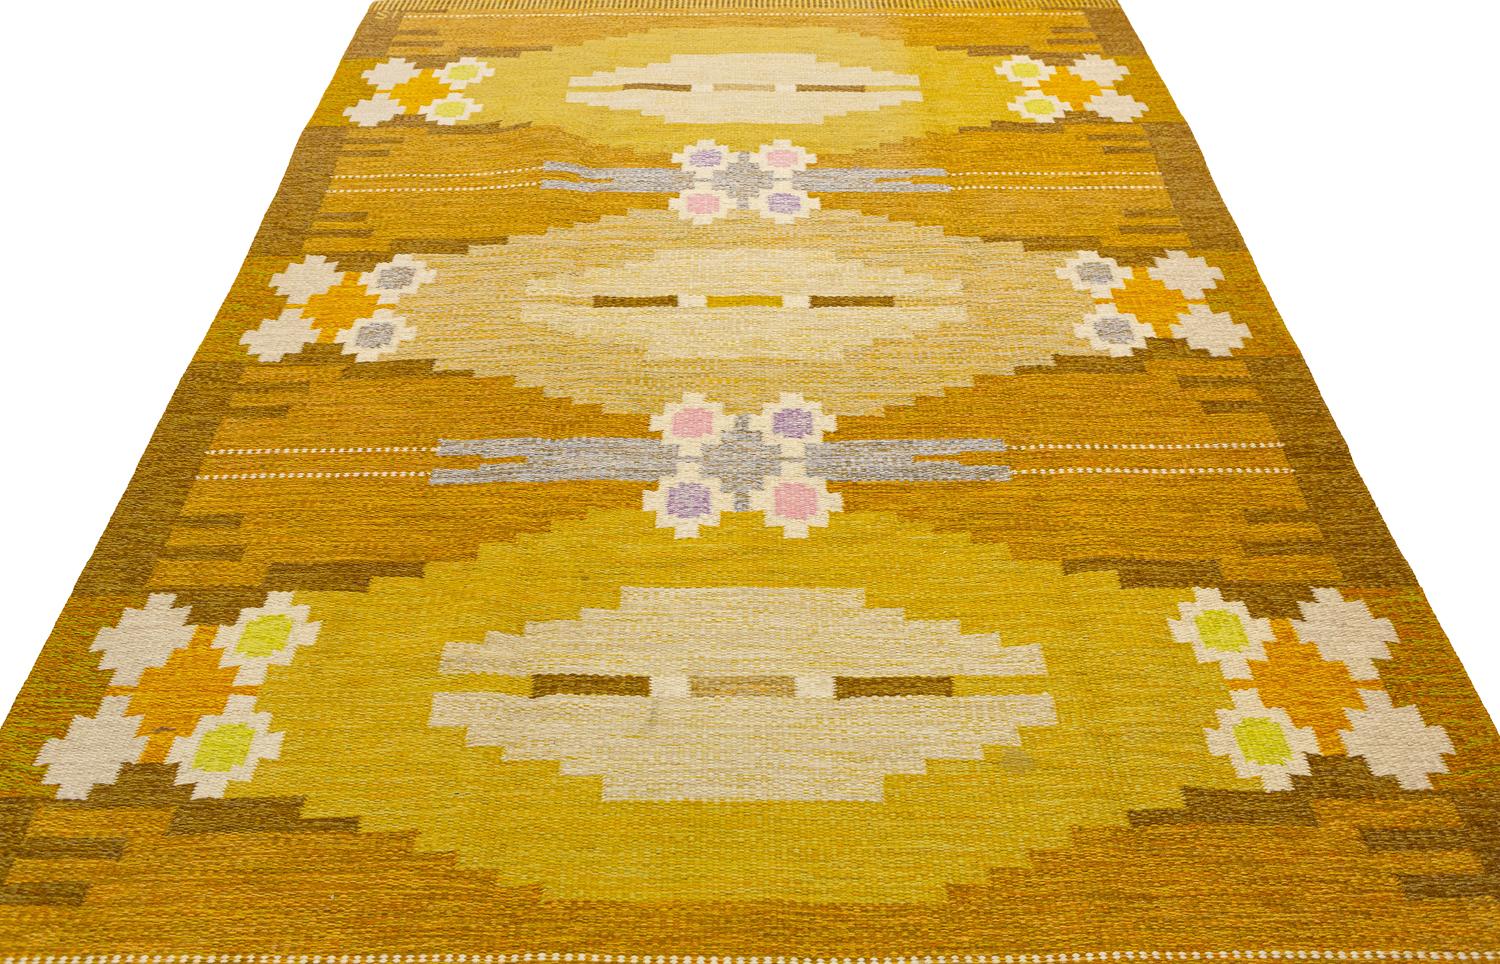 Hand-Knotted Vintage Swedish Flat-Weave Kilim by Ingegerd Silow, Ca. 1950